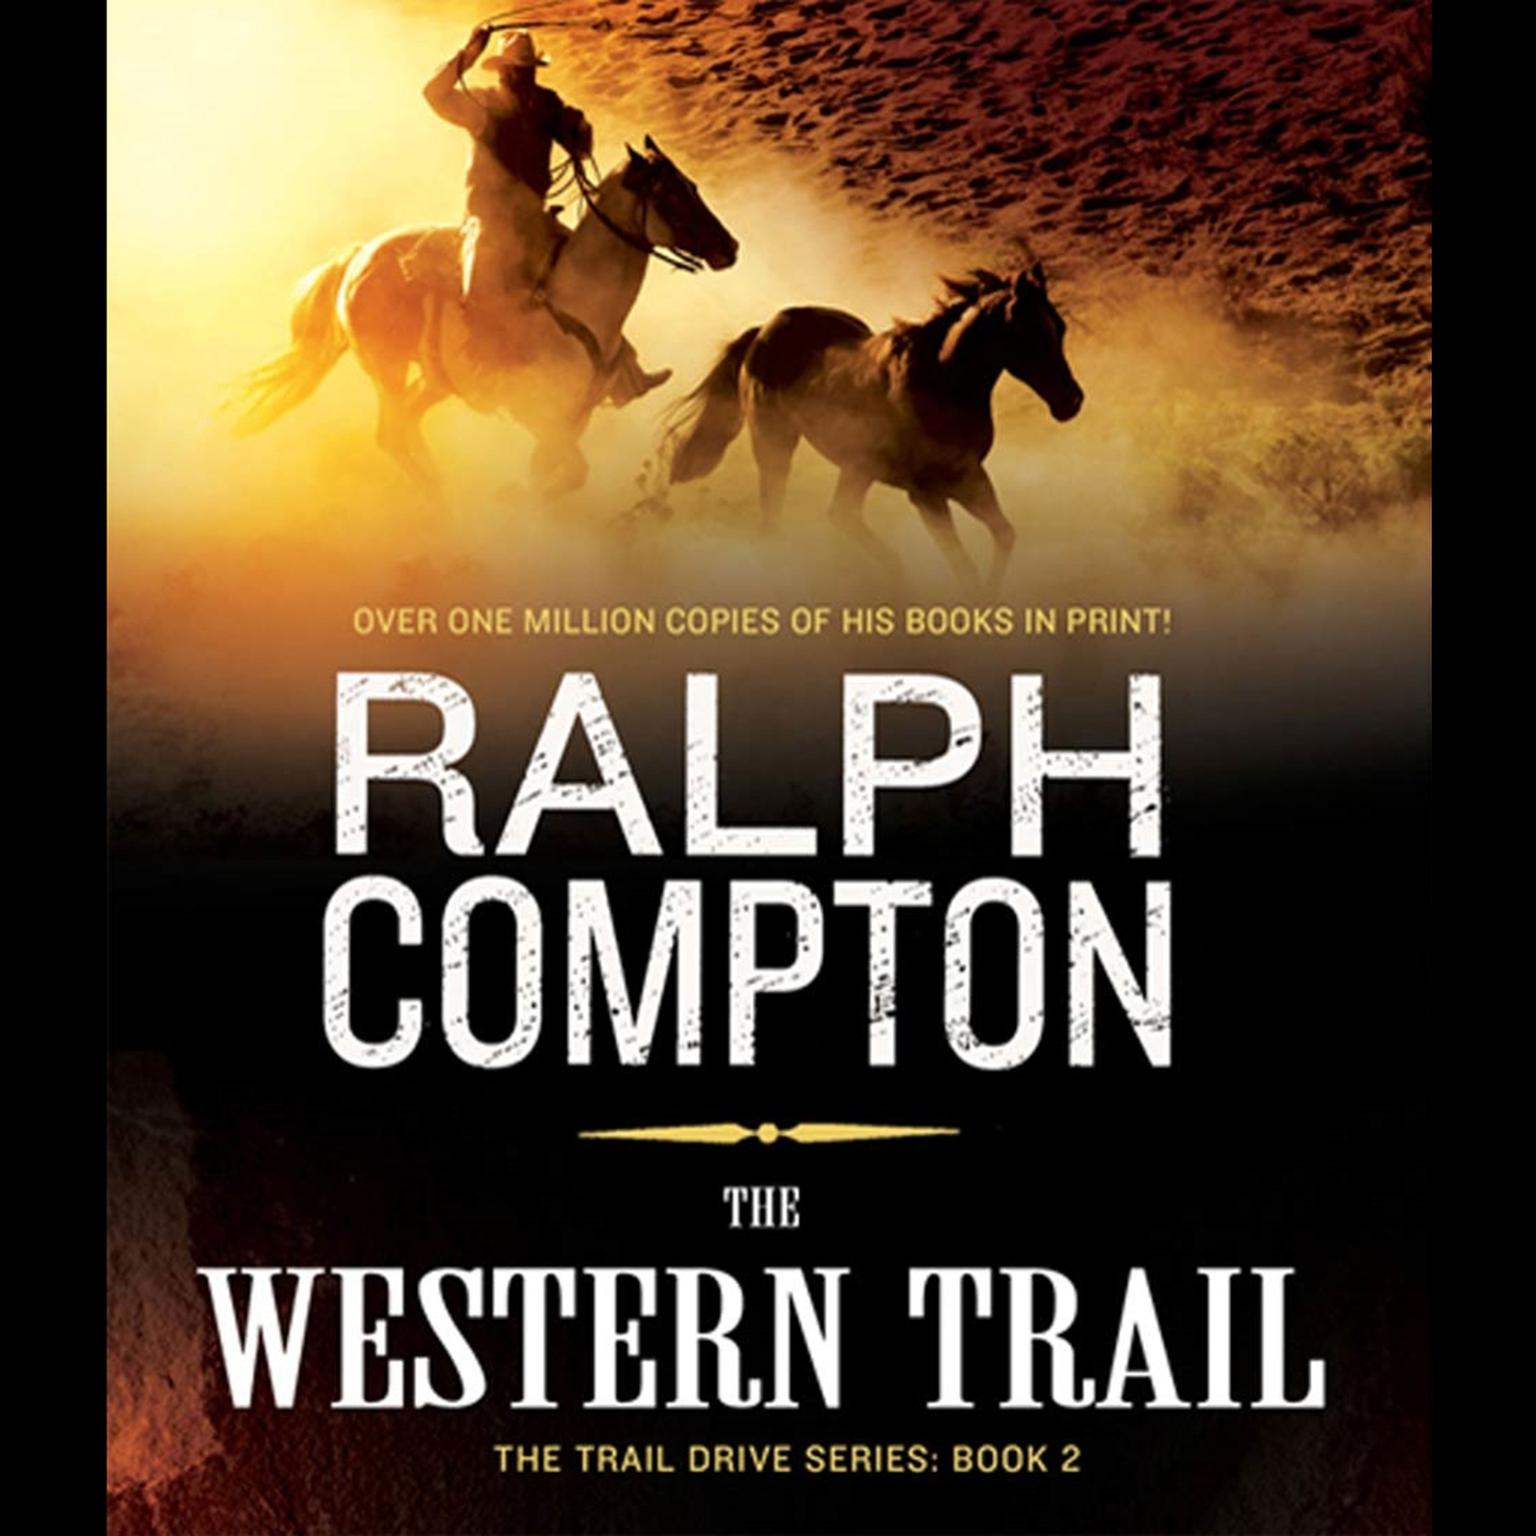 The Western Trail (Abridged): The Trail Drive, Book 2 Audiobook, by Ralph Compton